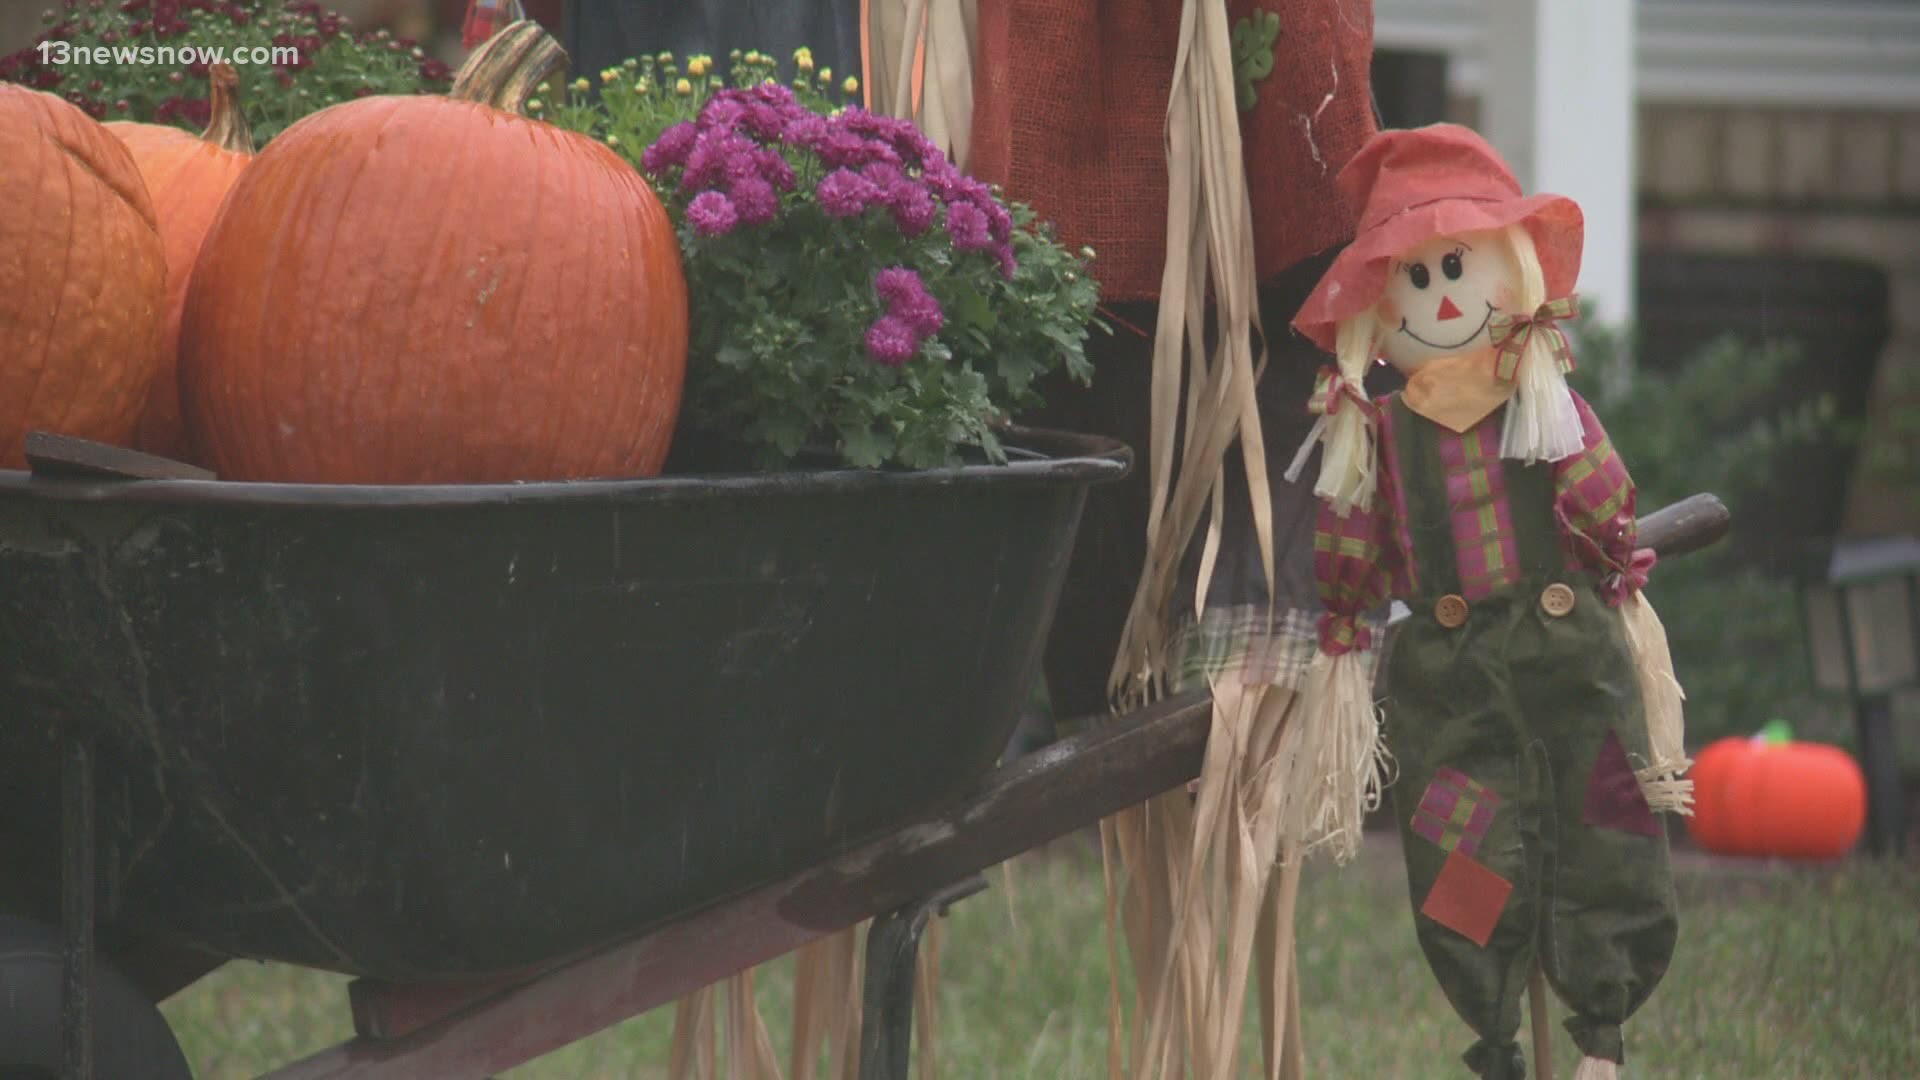 Hampton Roads cities are providing Halloween health risk recommendations due to COVID-19.